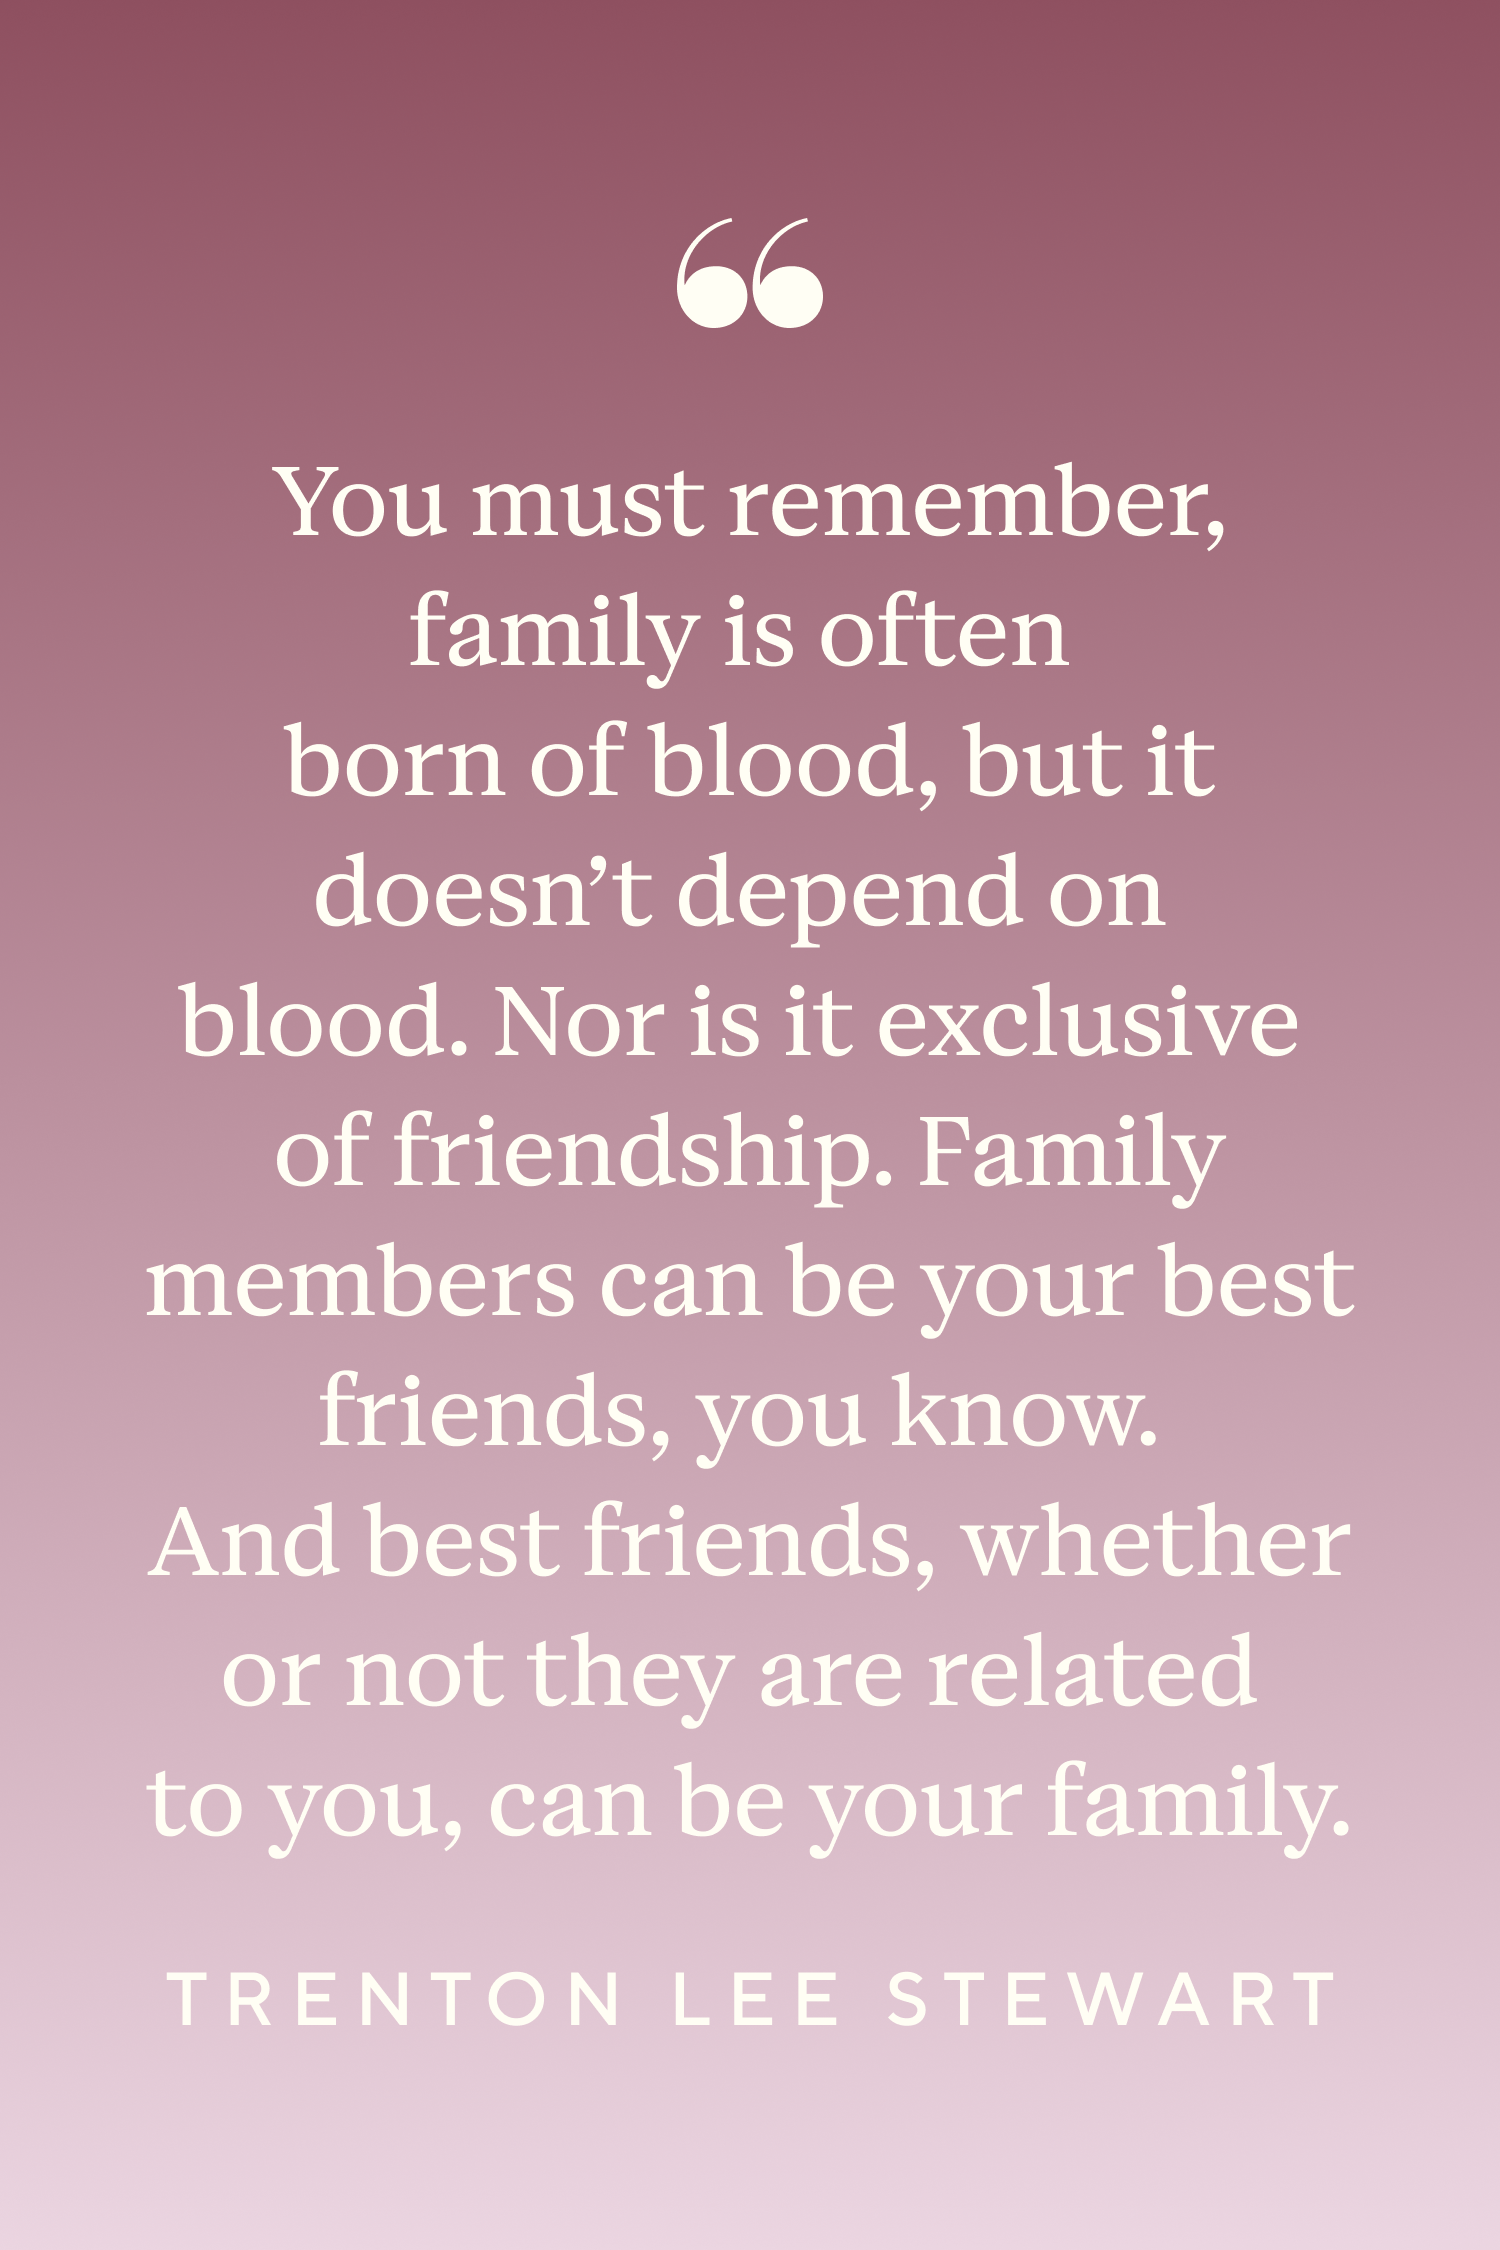 family and friends support quotes